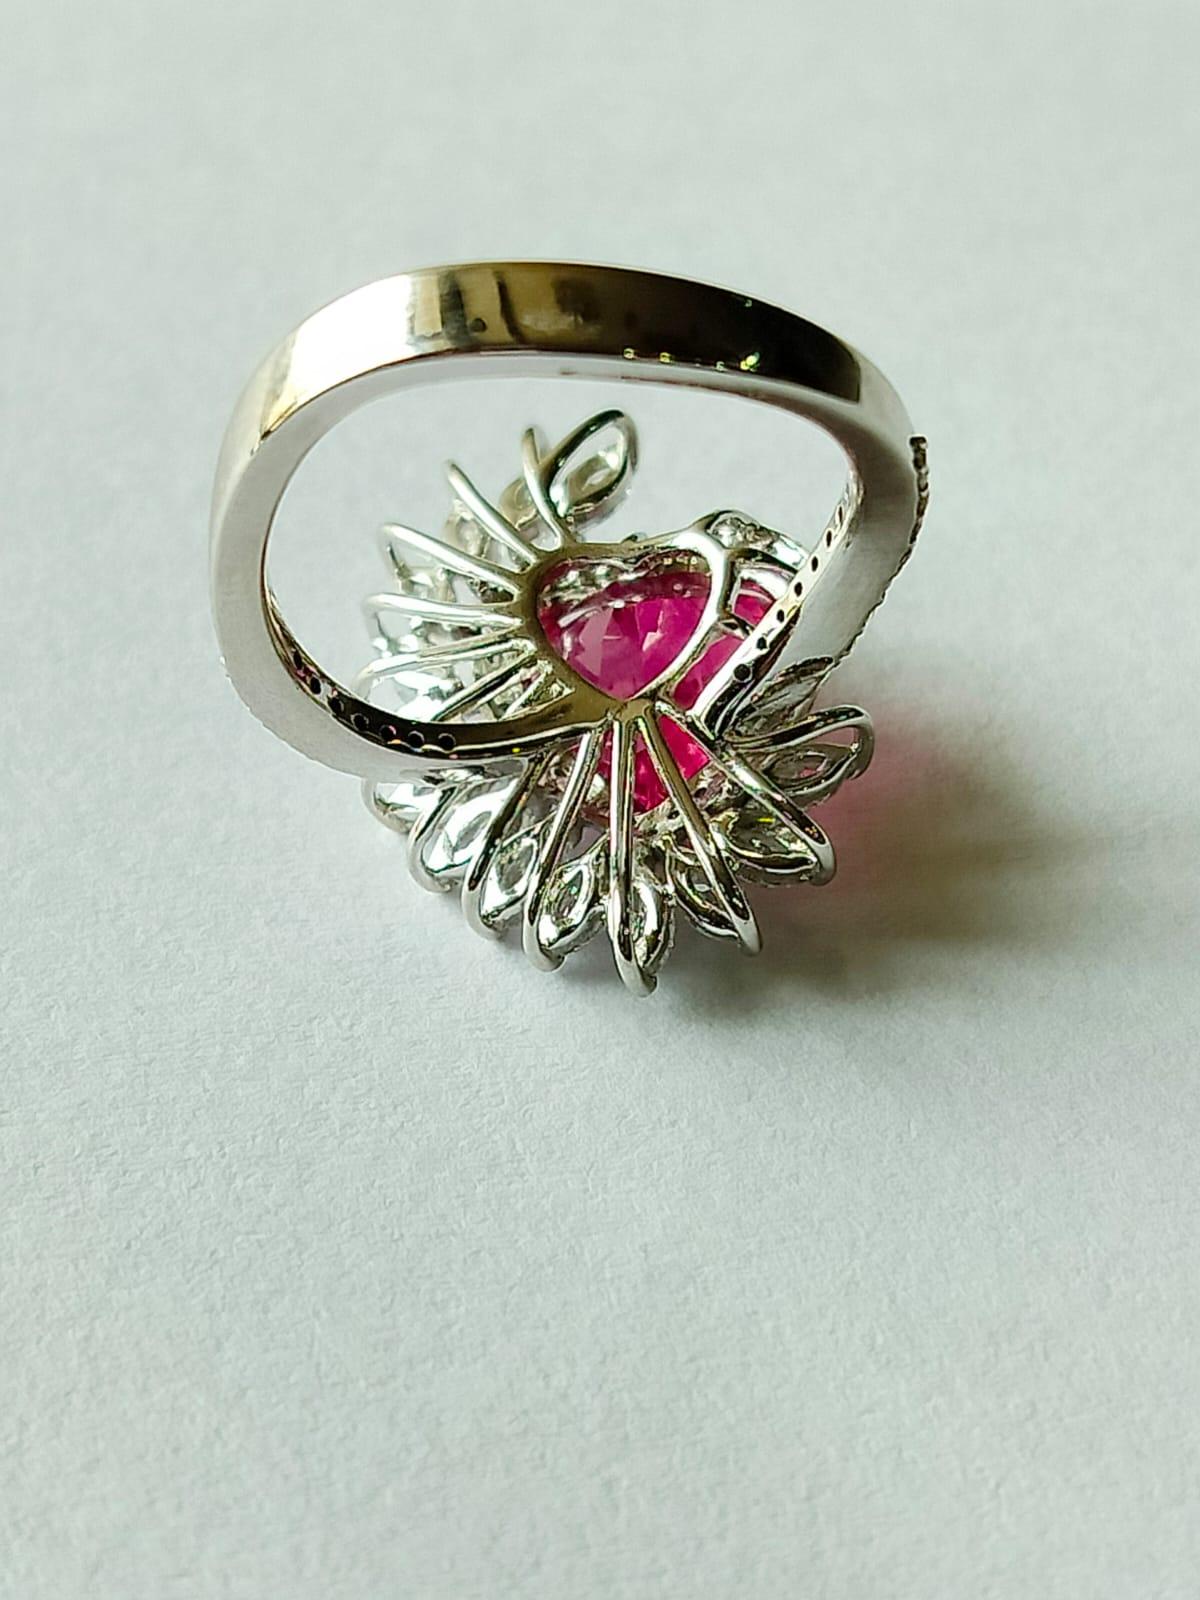 Set in 18K Gold, 3.51 Carats, Rubellite & Diamonds Engagement /Cocktail Ring For Sale 2